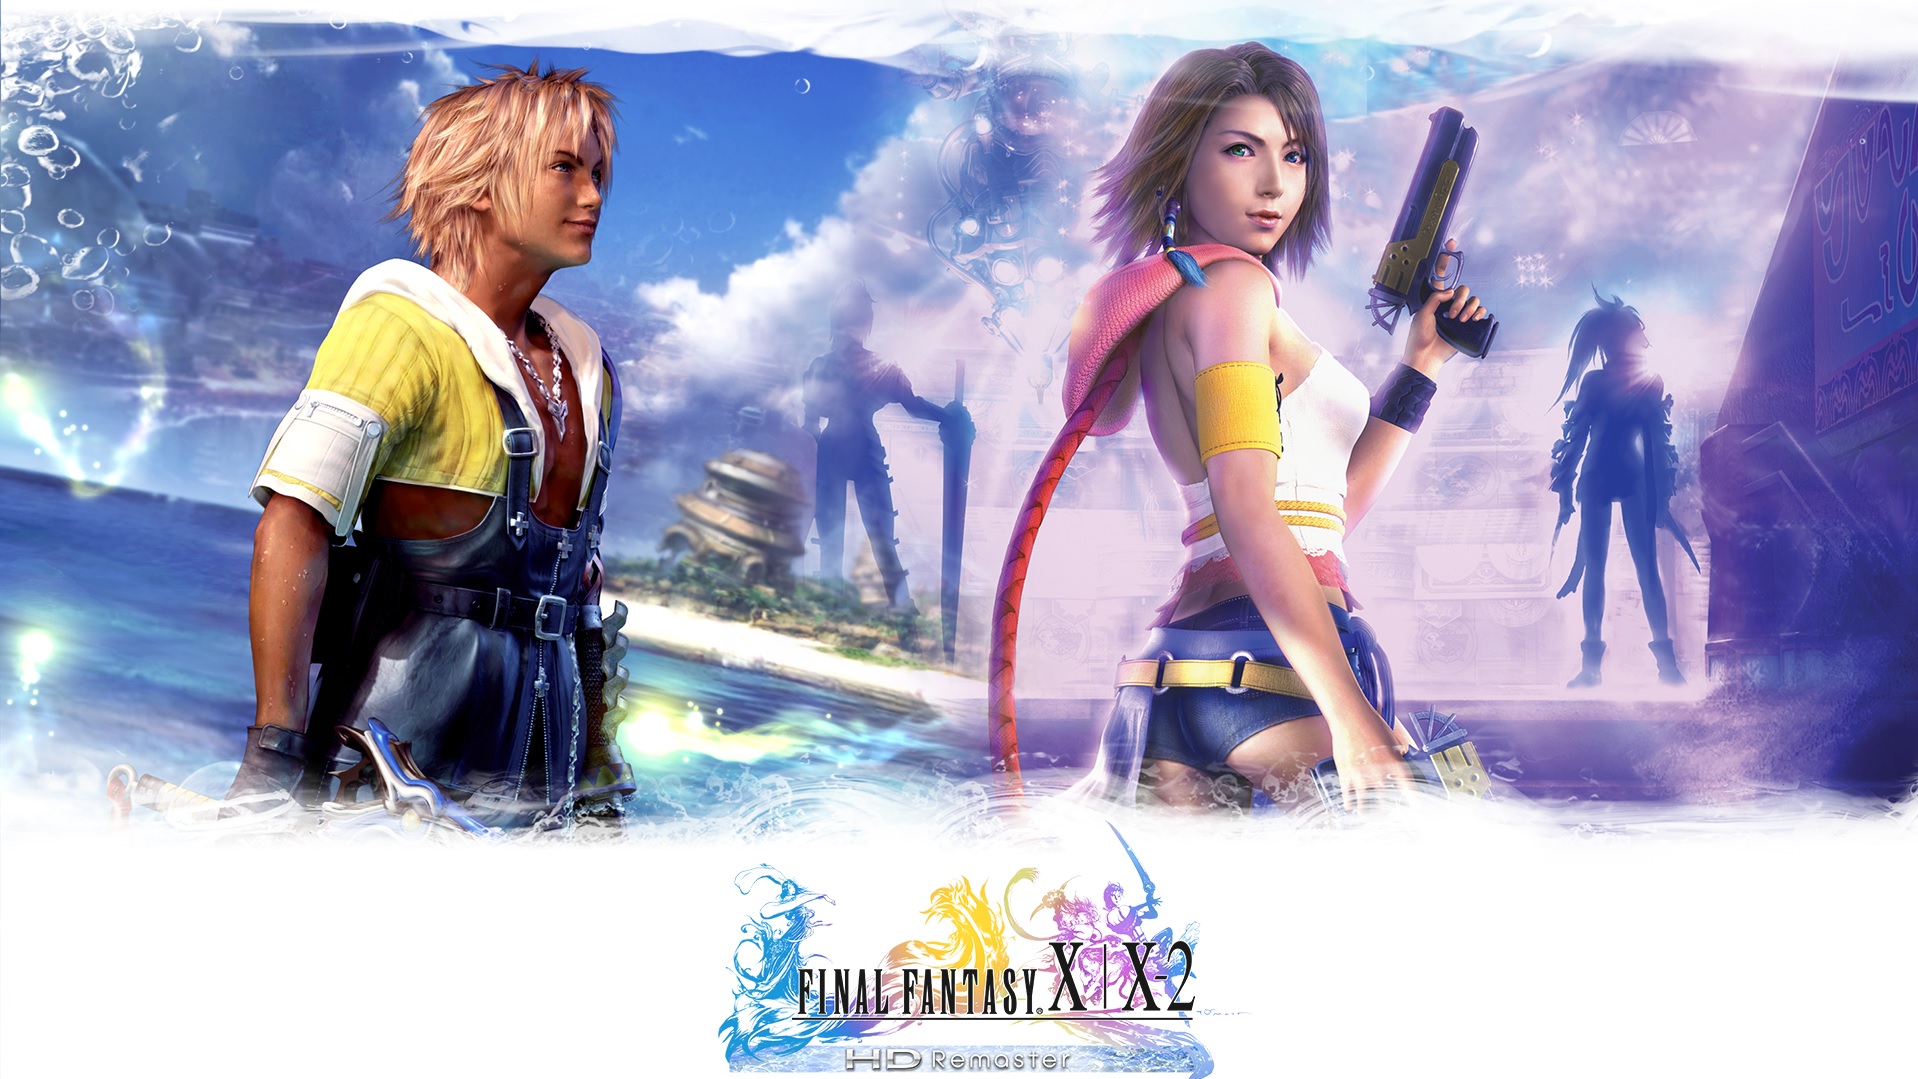 Final Fantasy X X 2 Hd Remaster Pc Version Is Locked At 30fps Graphics Options Revealed